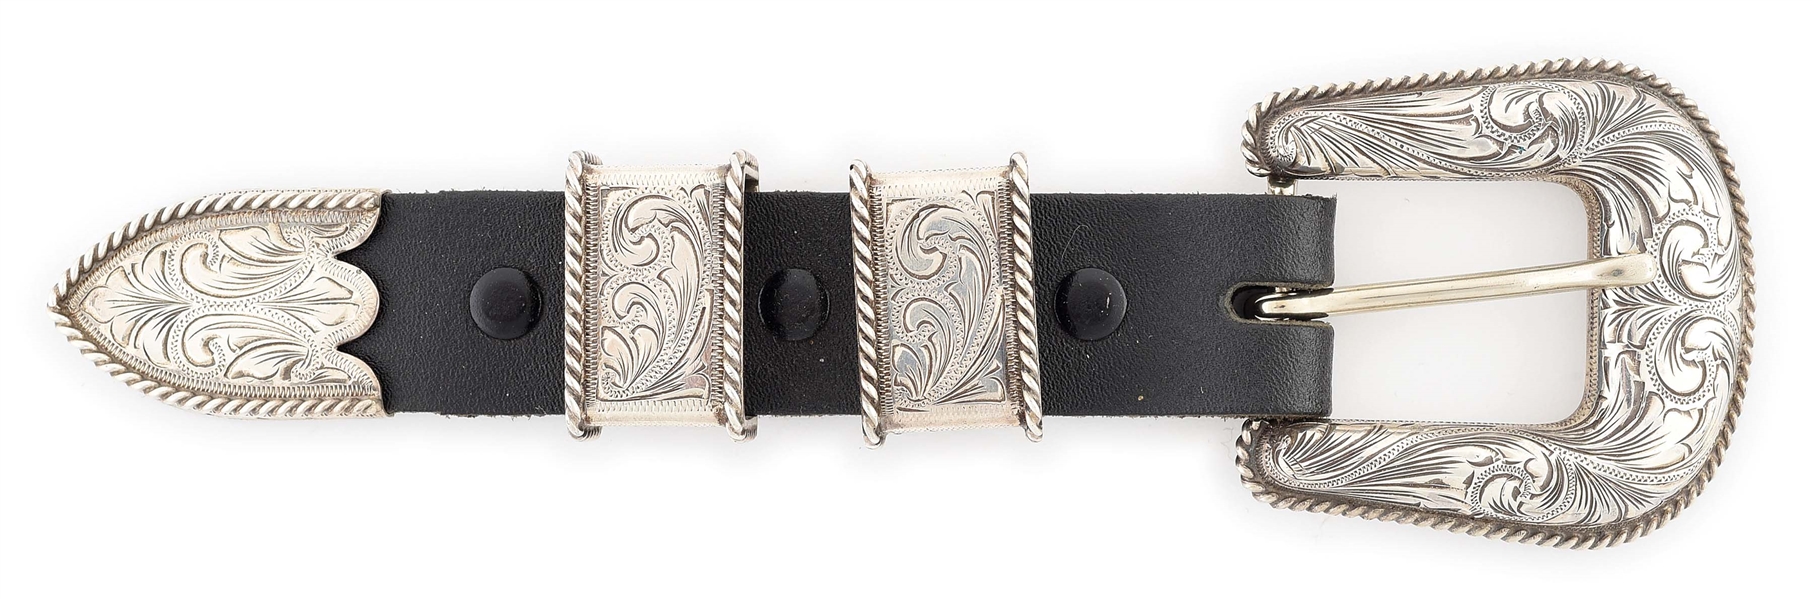 HOLLYWOOD CLASSICS STERLING BUCKLE SET